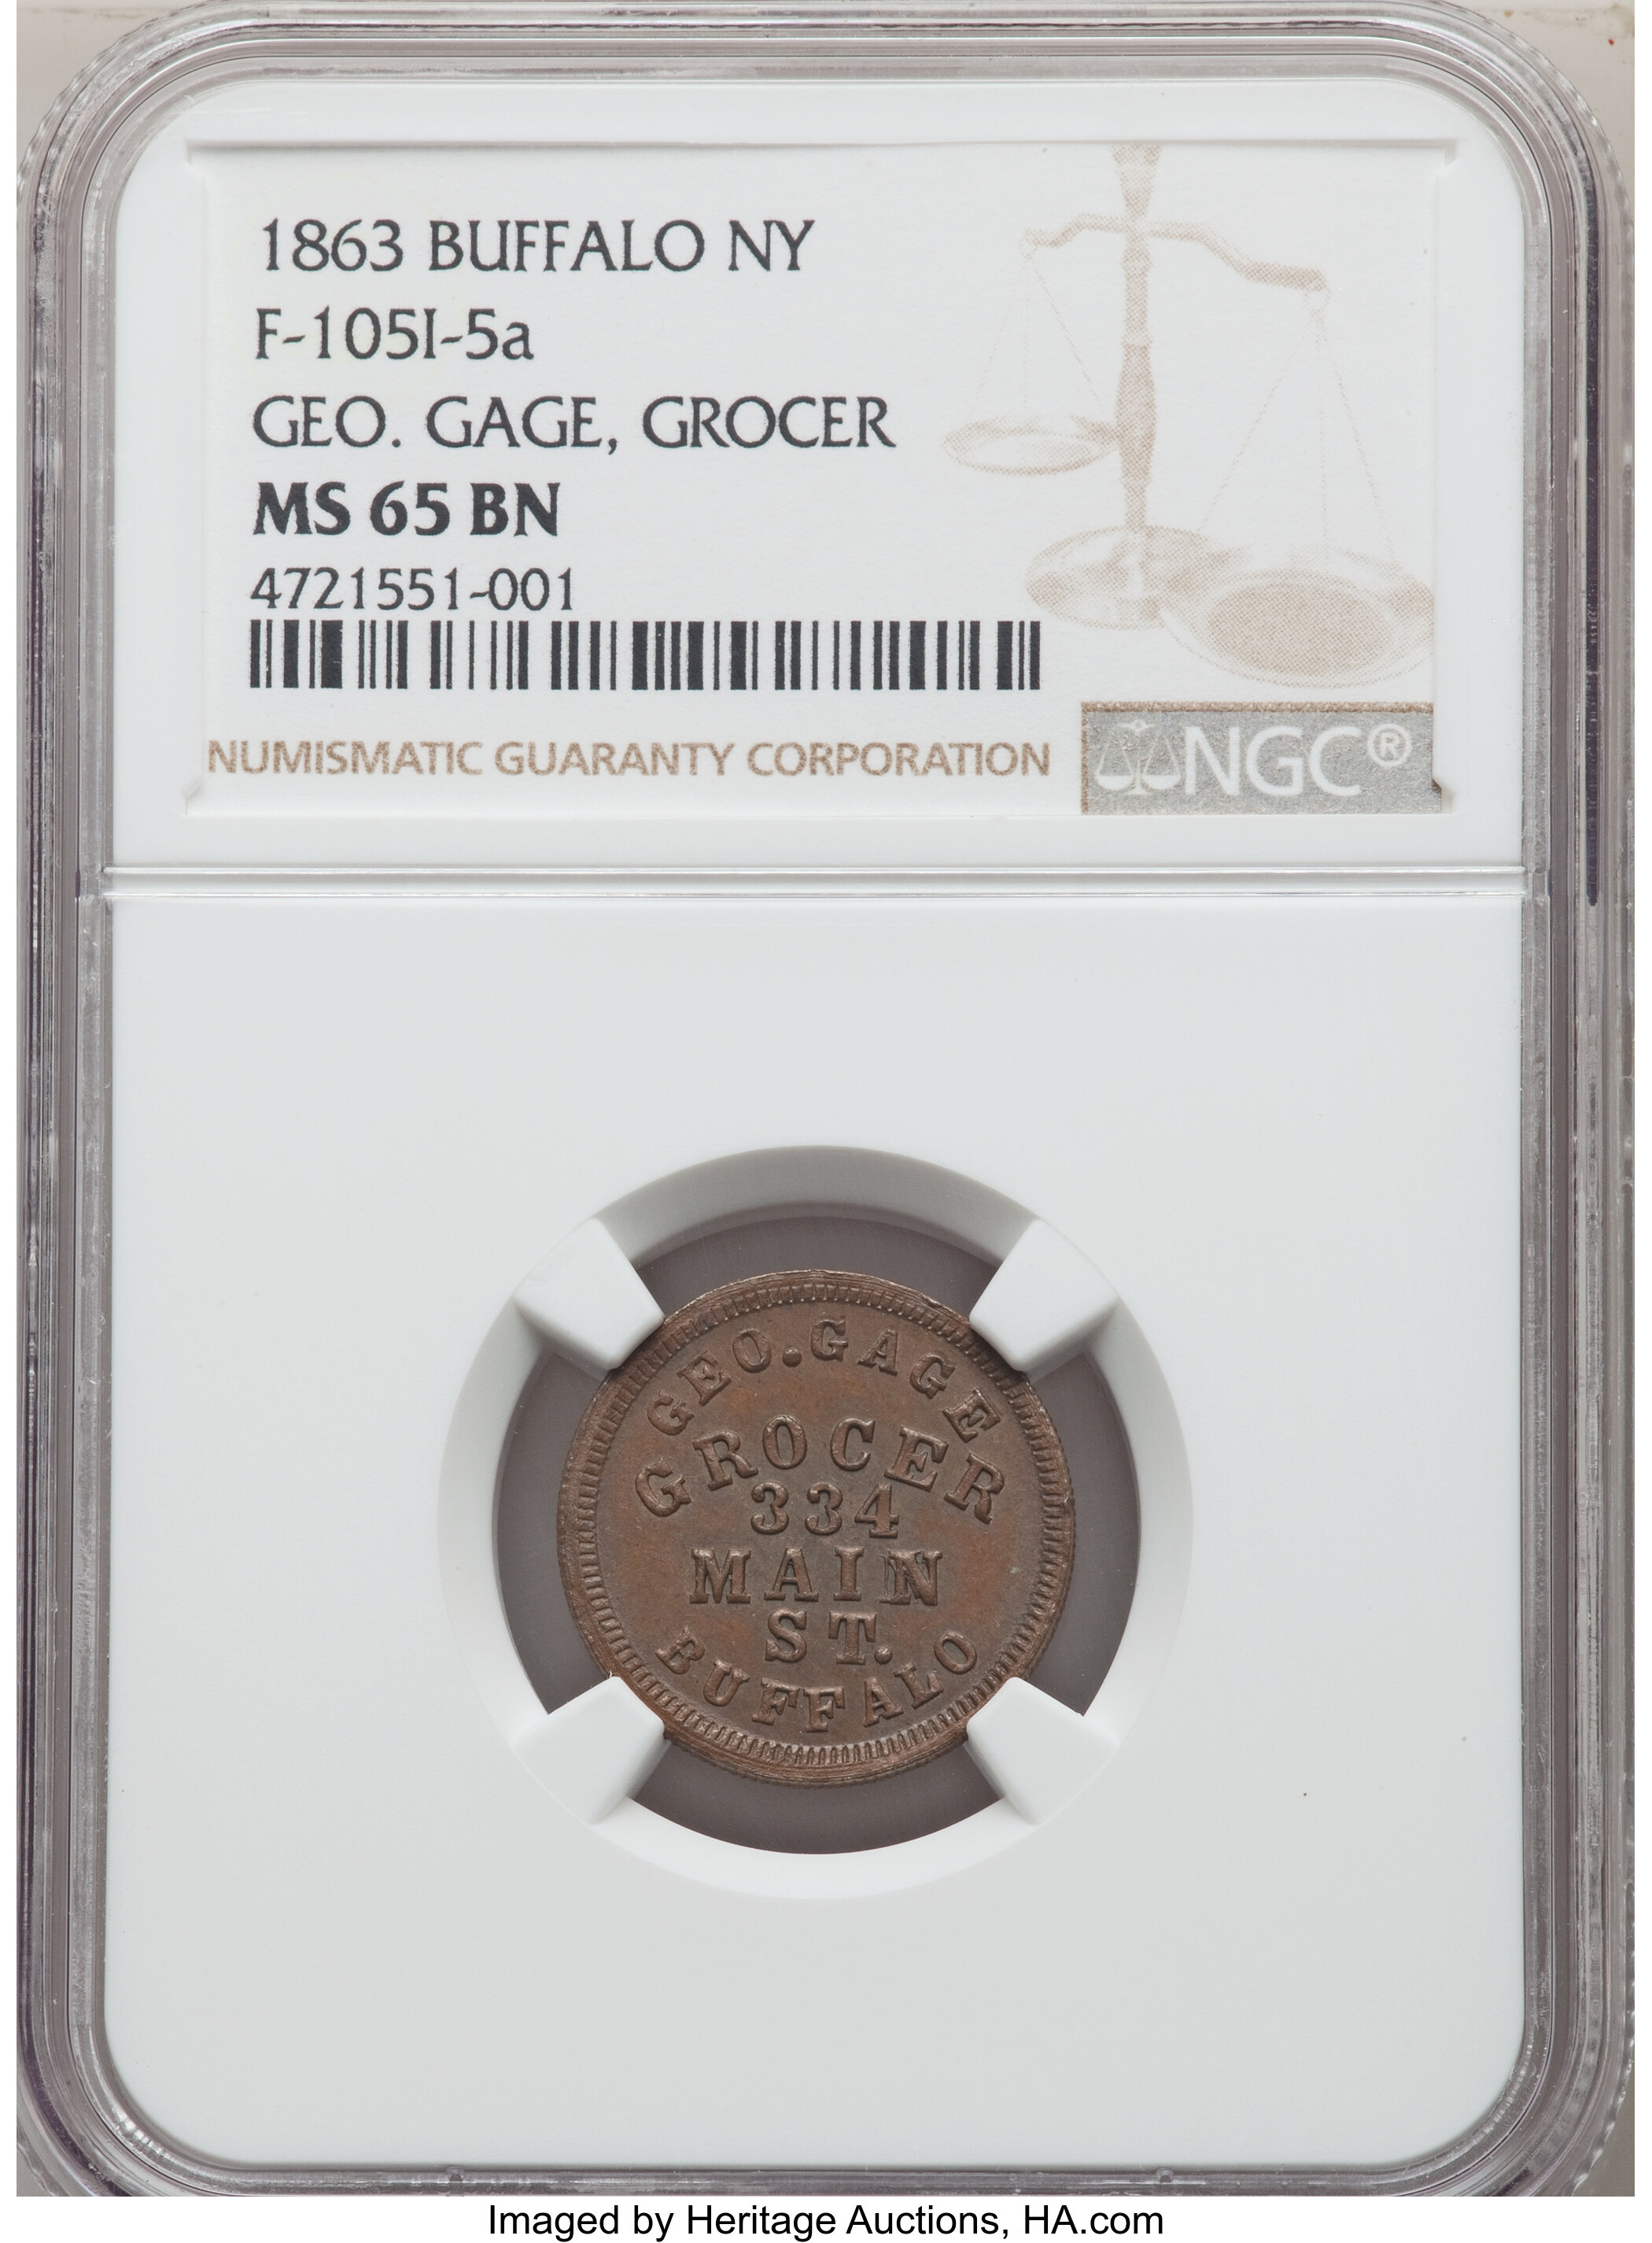 1863 Buffalo, Fuld-105I-5a, GEO, GAGE, GROCER, MS65 Brown NGC. | Lot #21288 | Heritage Auctions